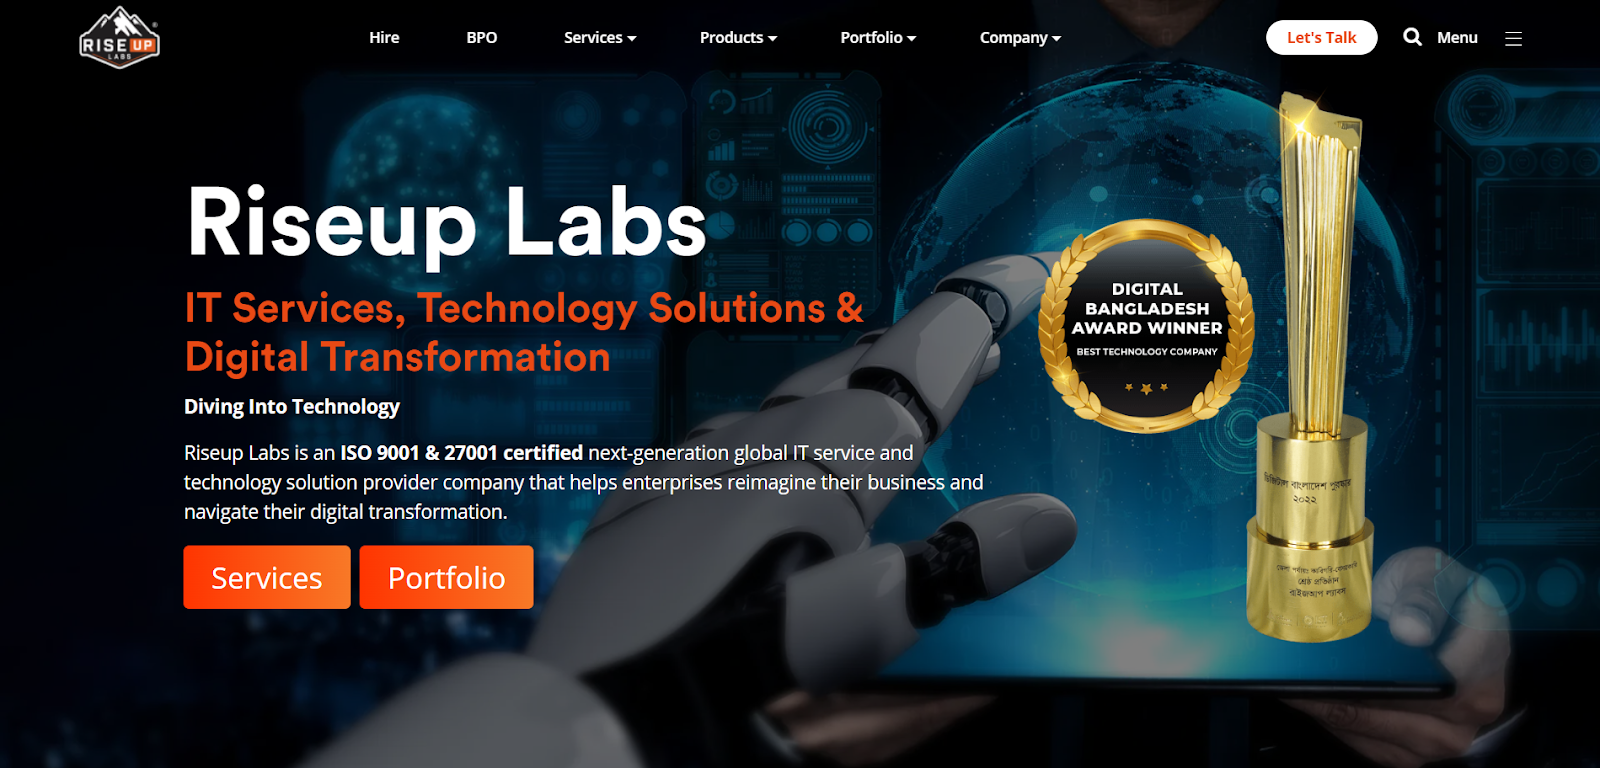 Riseup labs is a good software company in Bangladesh